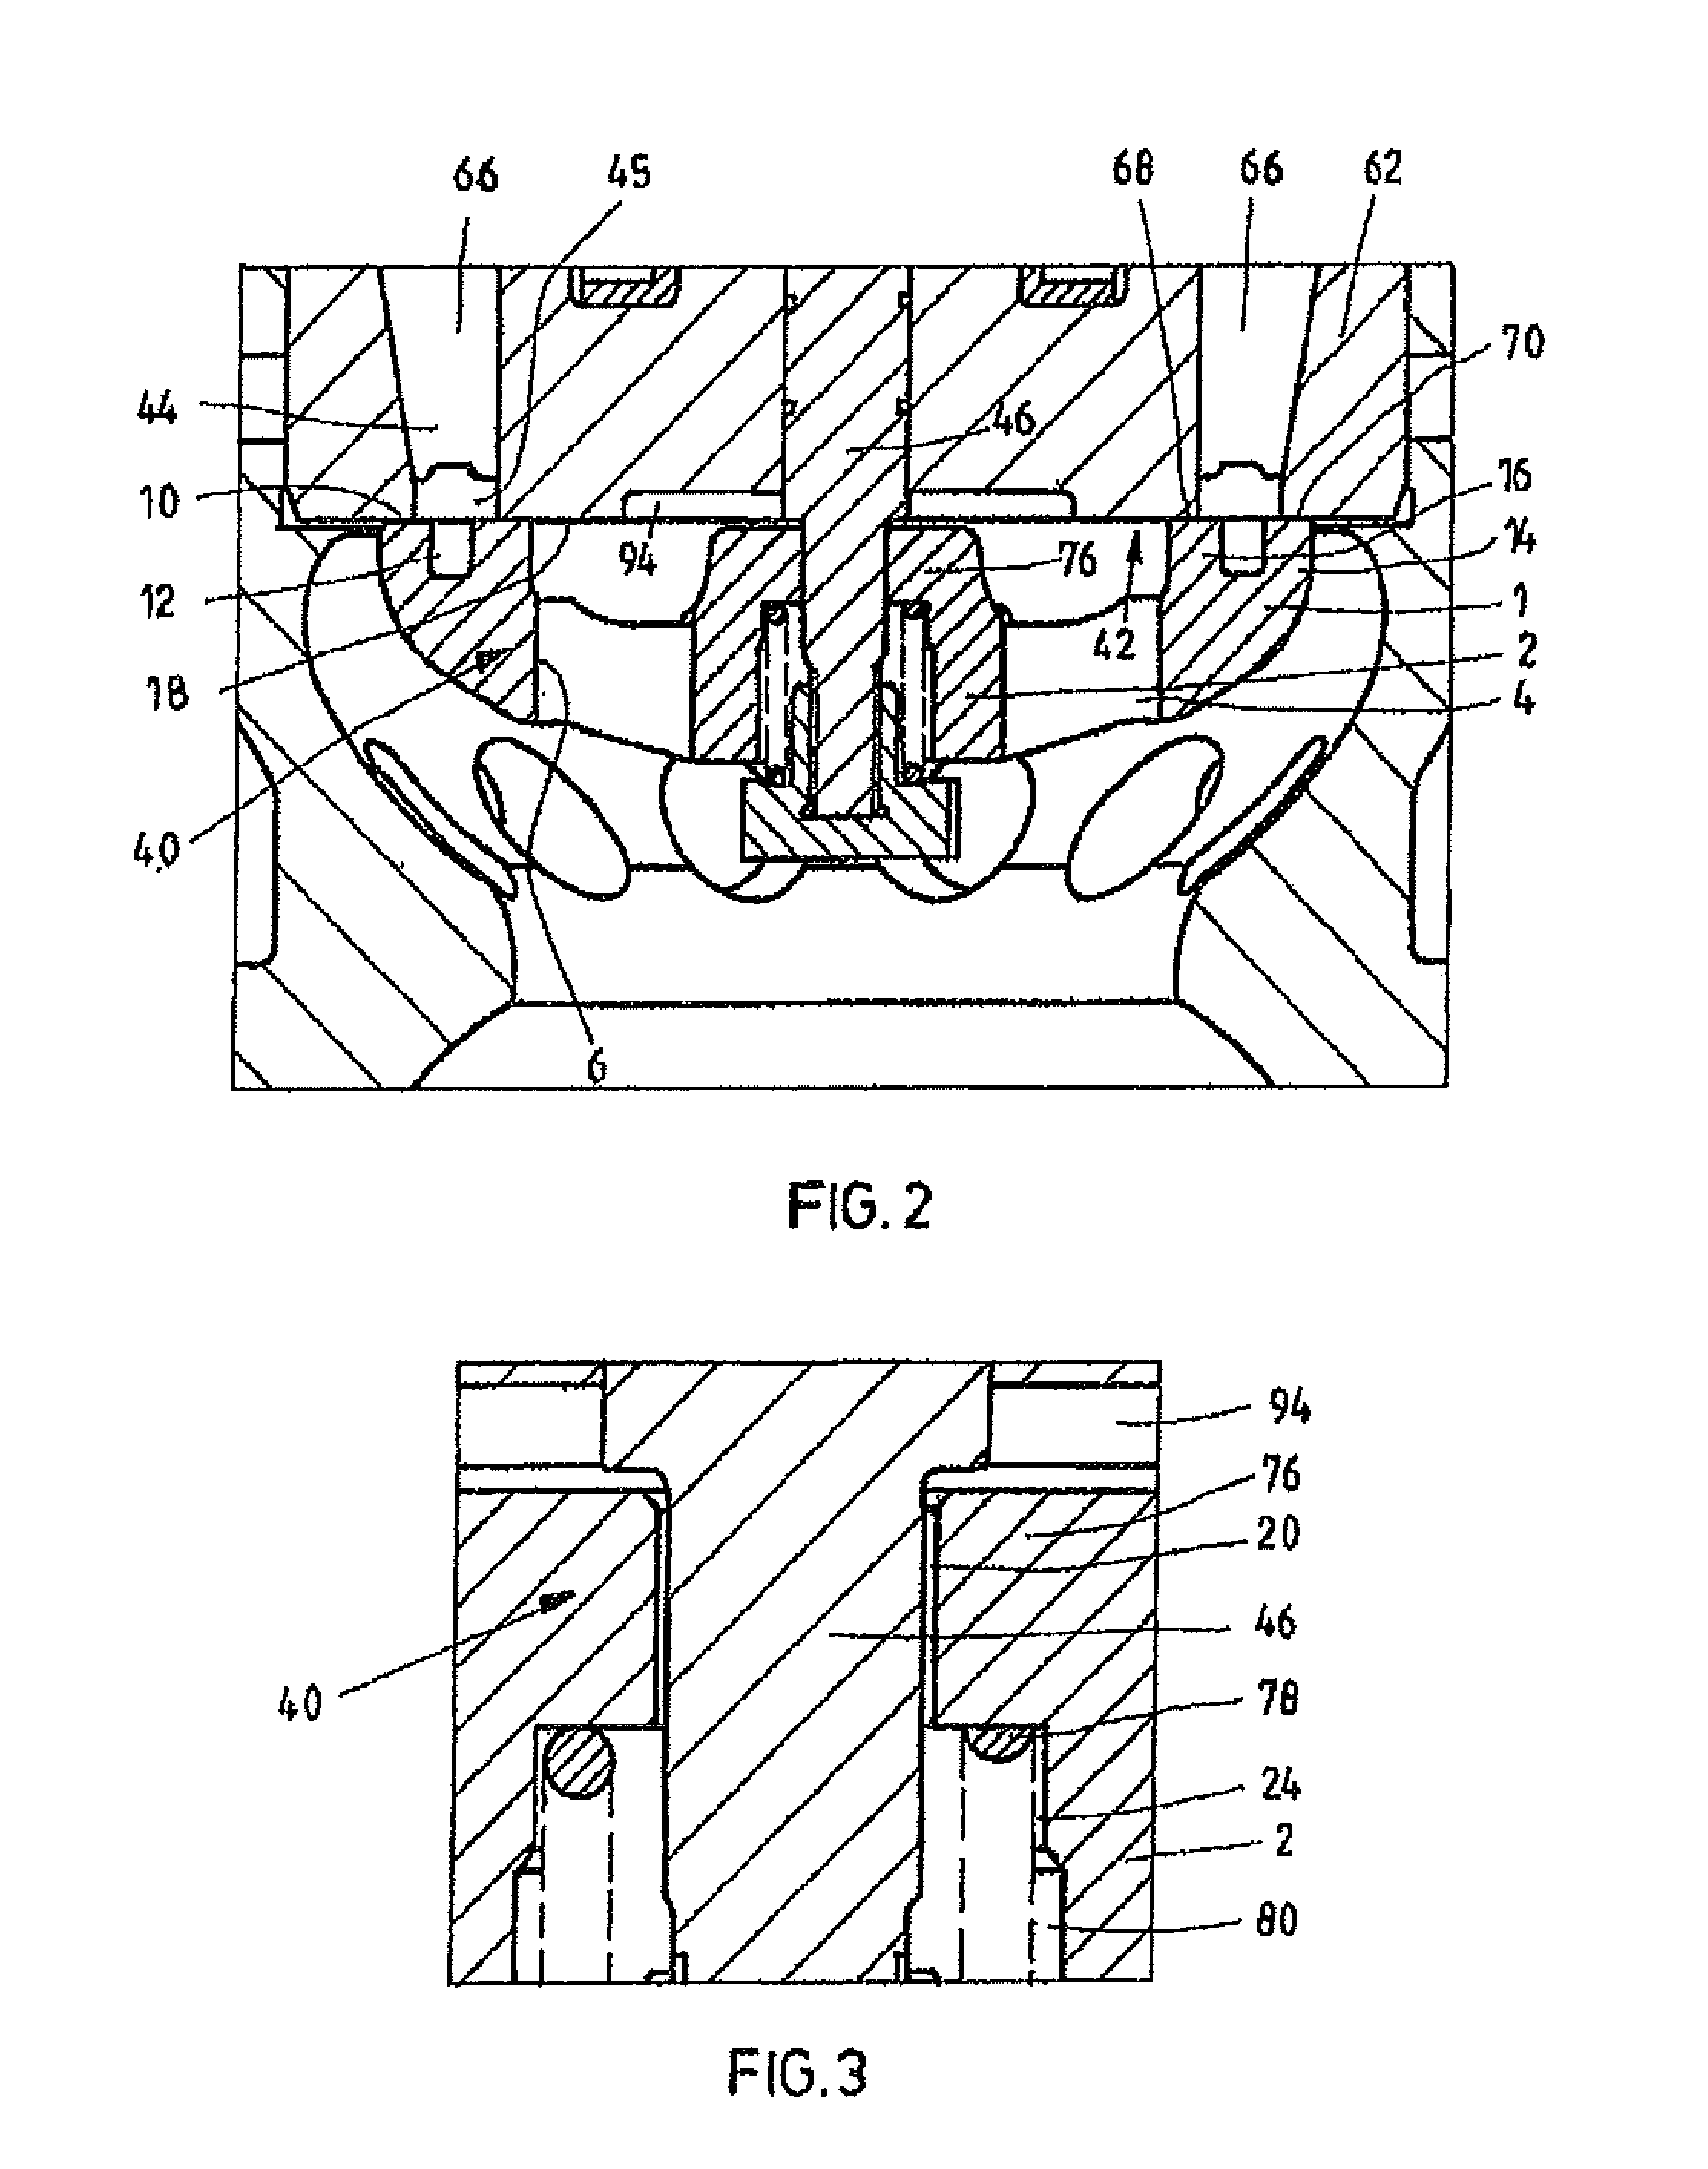 Low-pressure valve with an inner and outer throughflow cross section